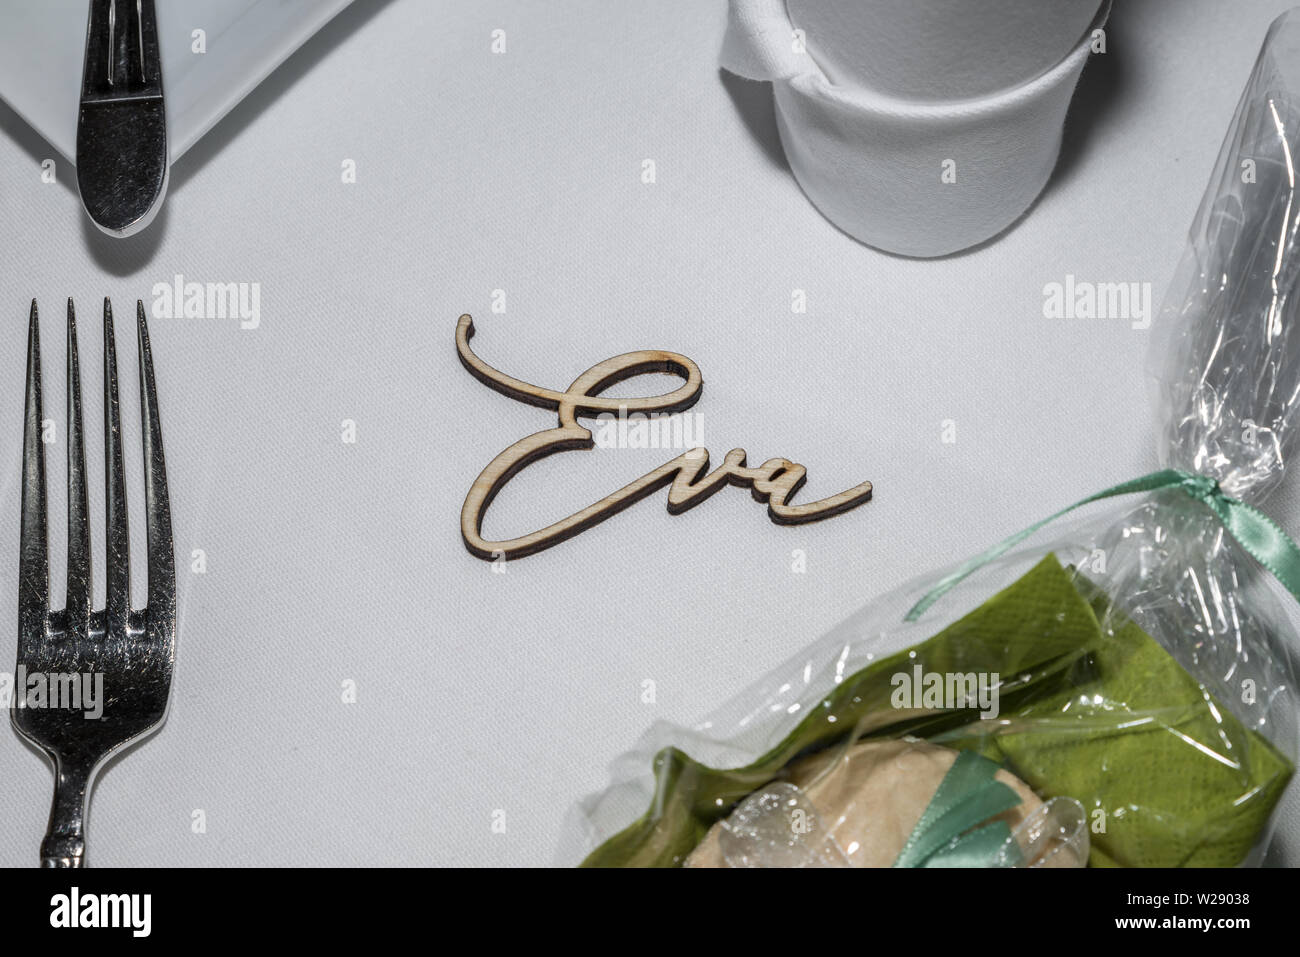 Table decoration of a wedding with glasses of cutlery and the name Eva, Germany Stock Photo